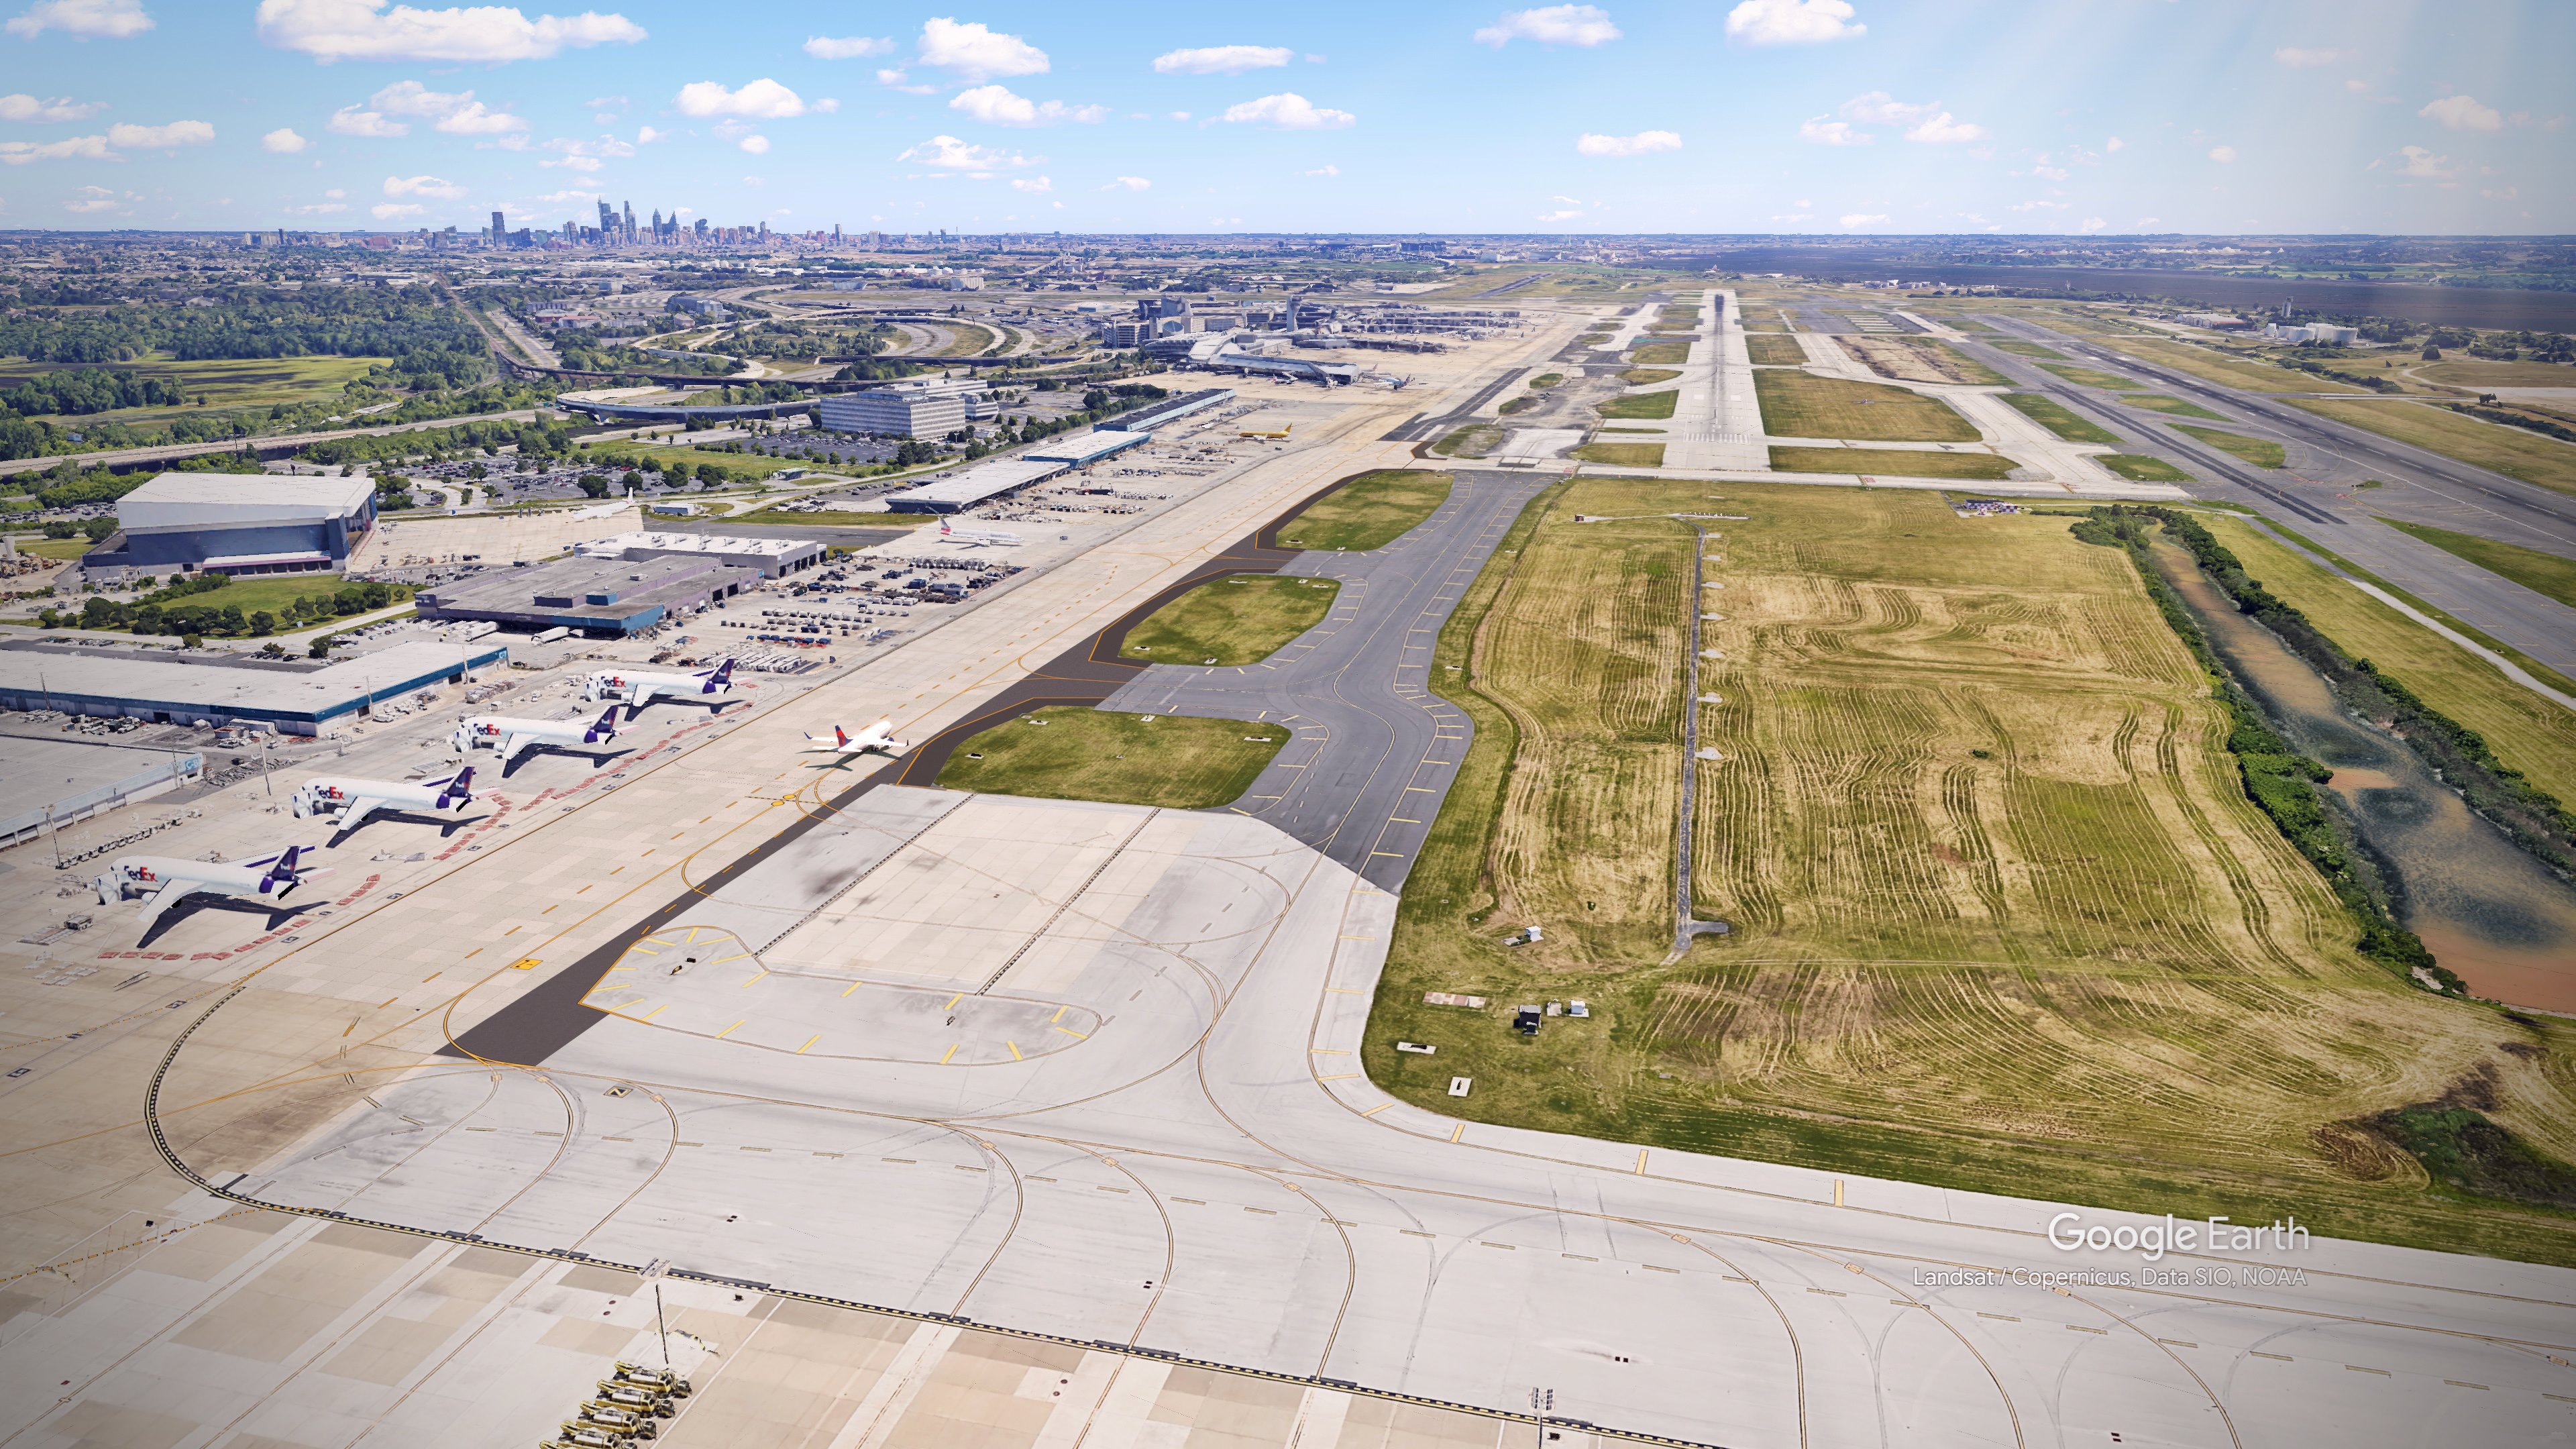 Taxiway J at PHL Airport from Google Earth